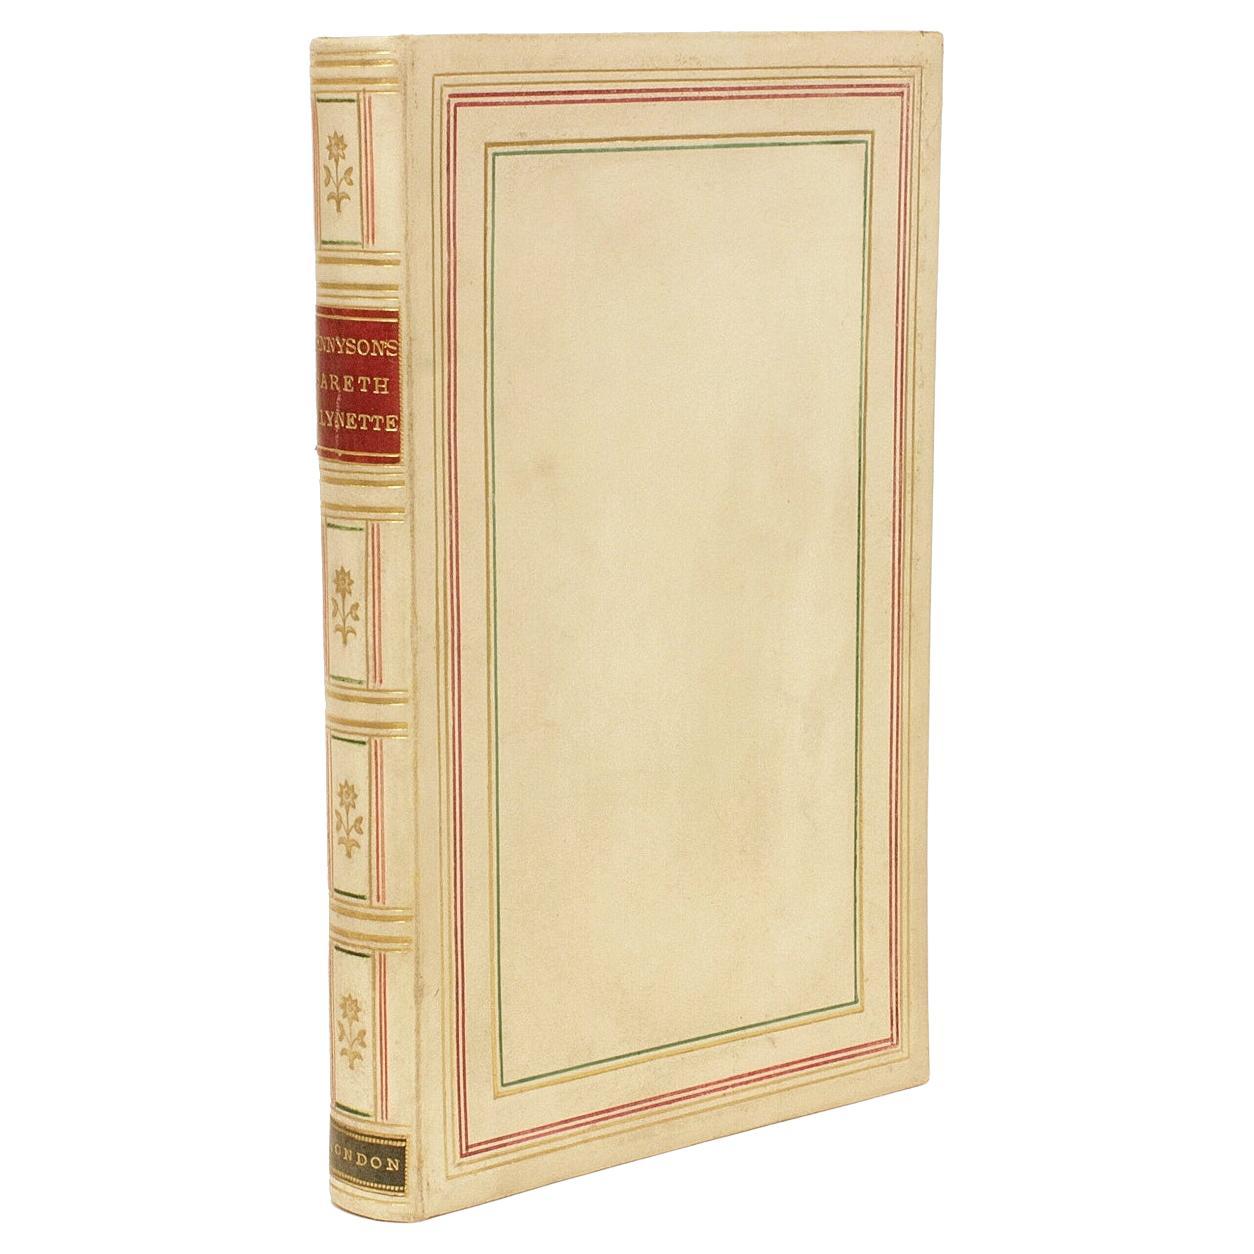 Tennyson, Alfred. Gareth and Lynette. 1872, Bound in a Fine Full Vellum Binding For Sale